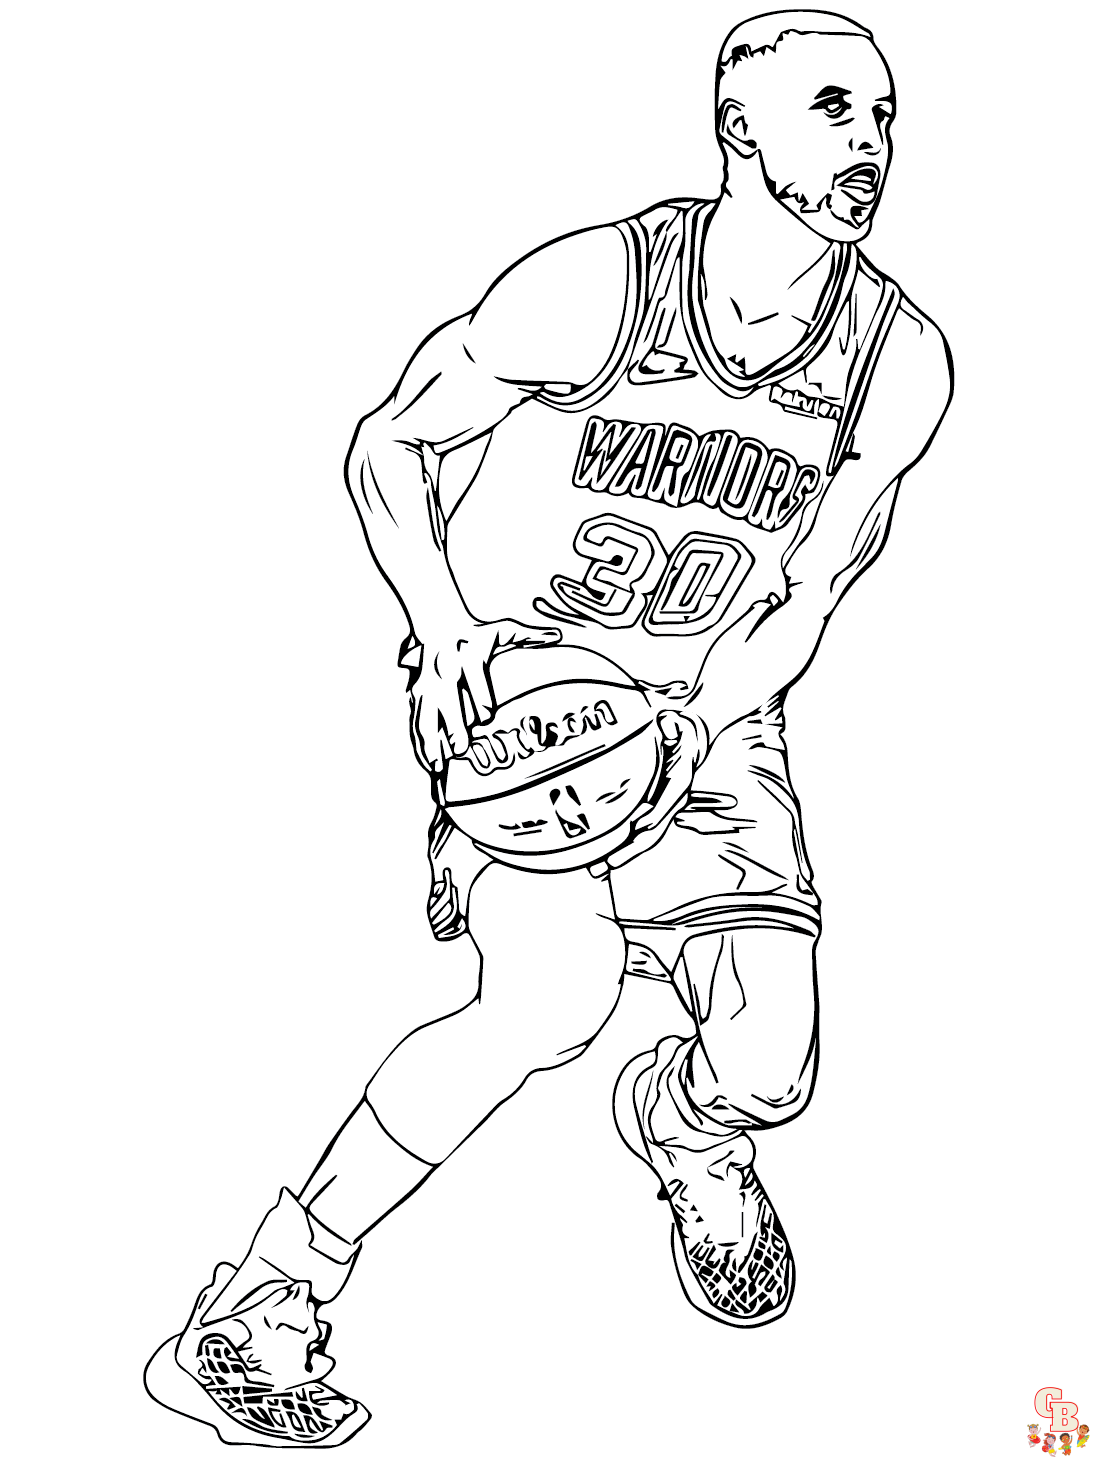 Stephen Curry coloring pages free